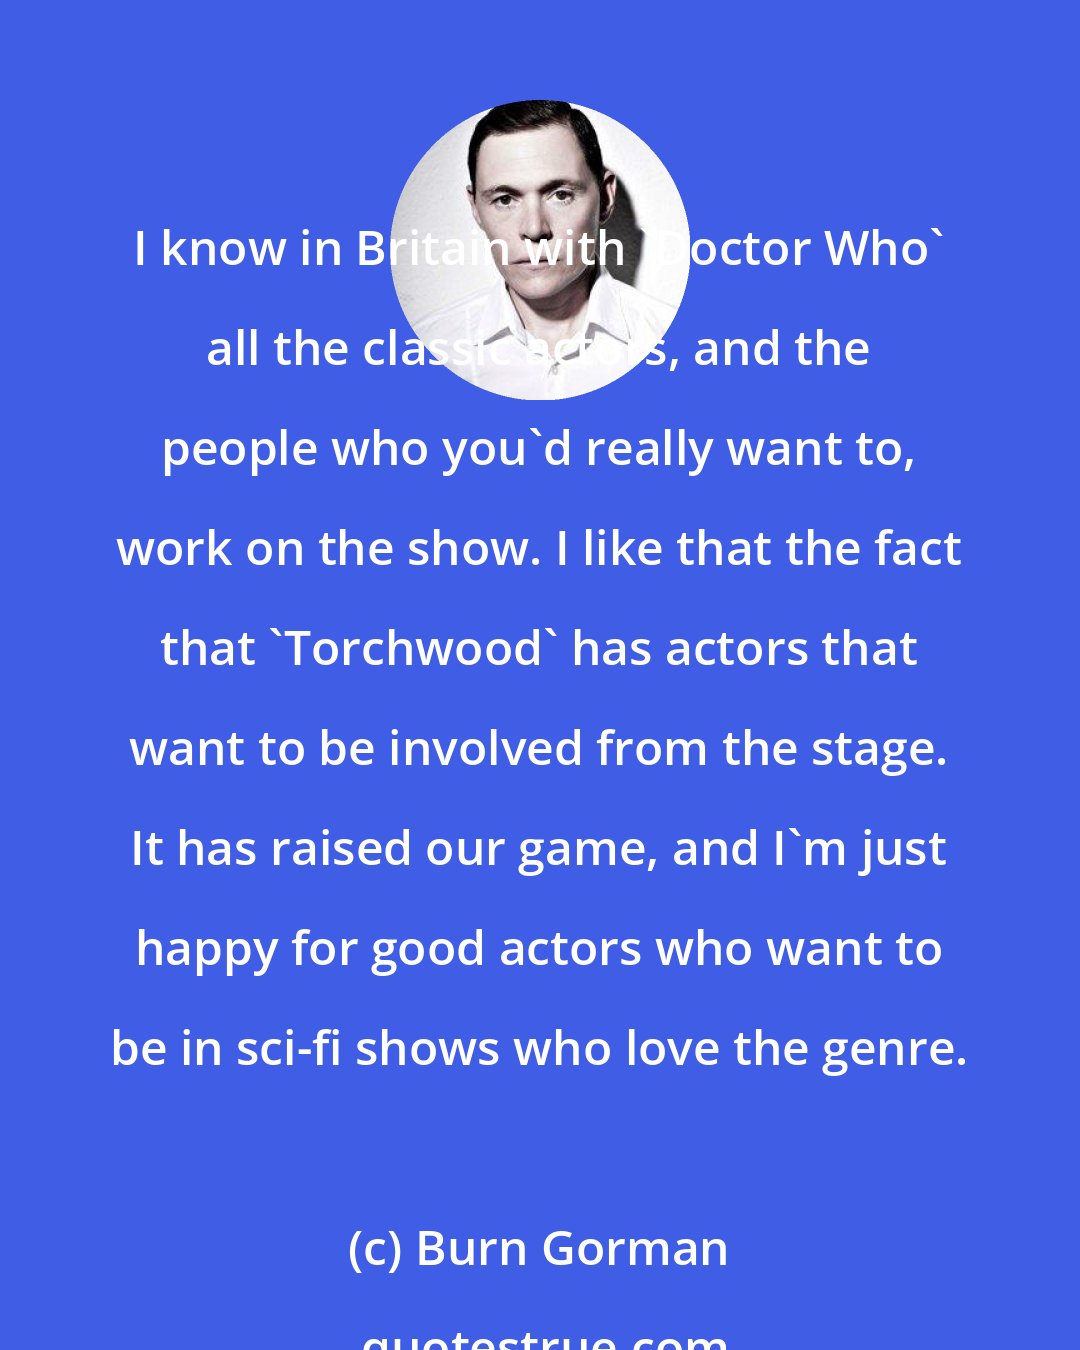 Burn Gorman: I know in Britain with 'Doctor Who' all the classic actors, and the people who you'd really want to, work on the show. I like that the fact that 'Torchwood' has actors that want to be involved from the stage. It has raised our game, and I'm just happy for good actors who want to be in sci-fi shows who love the genre.